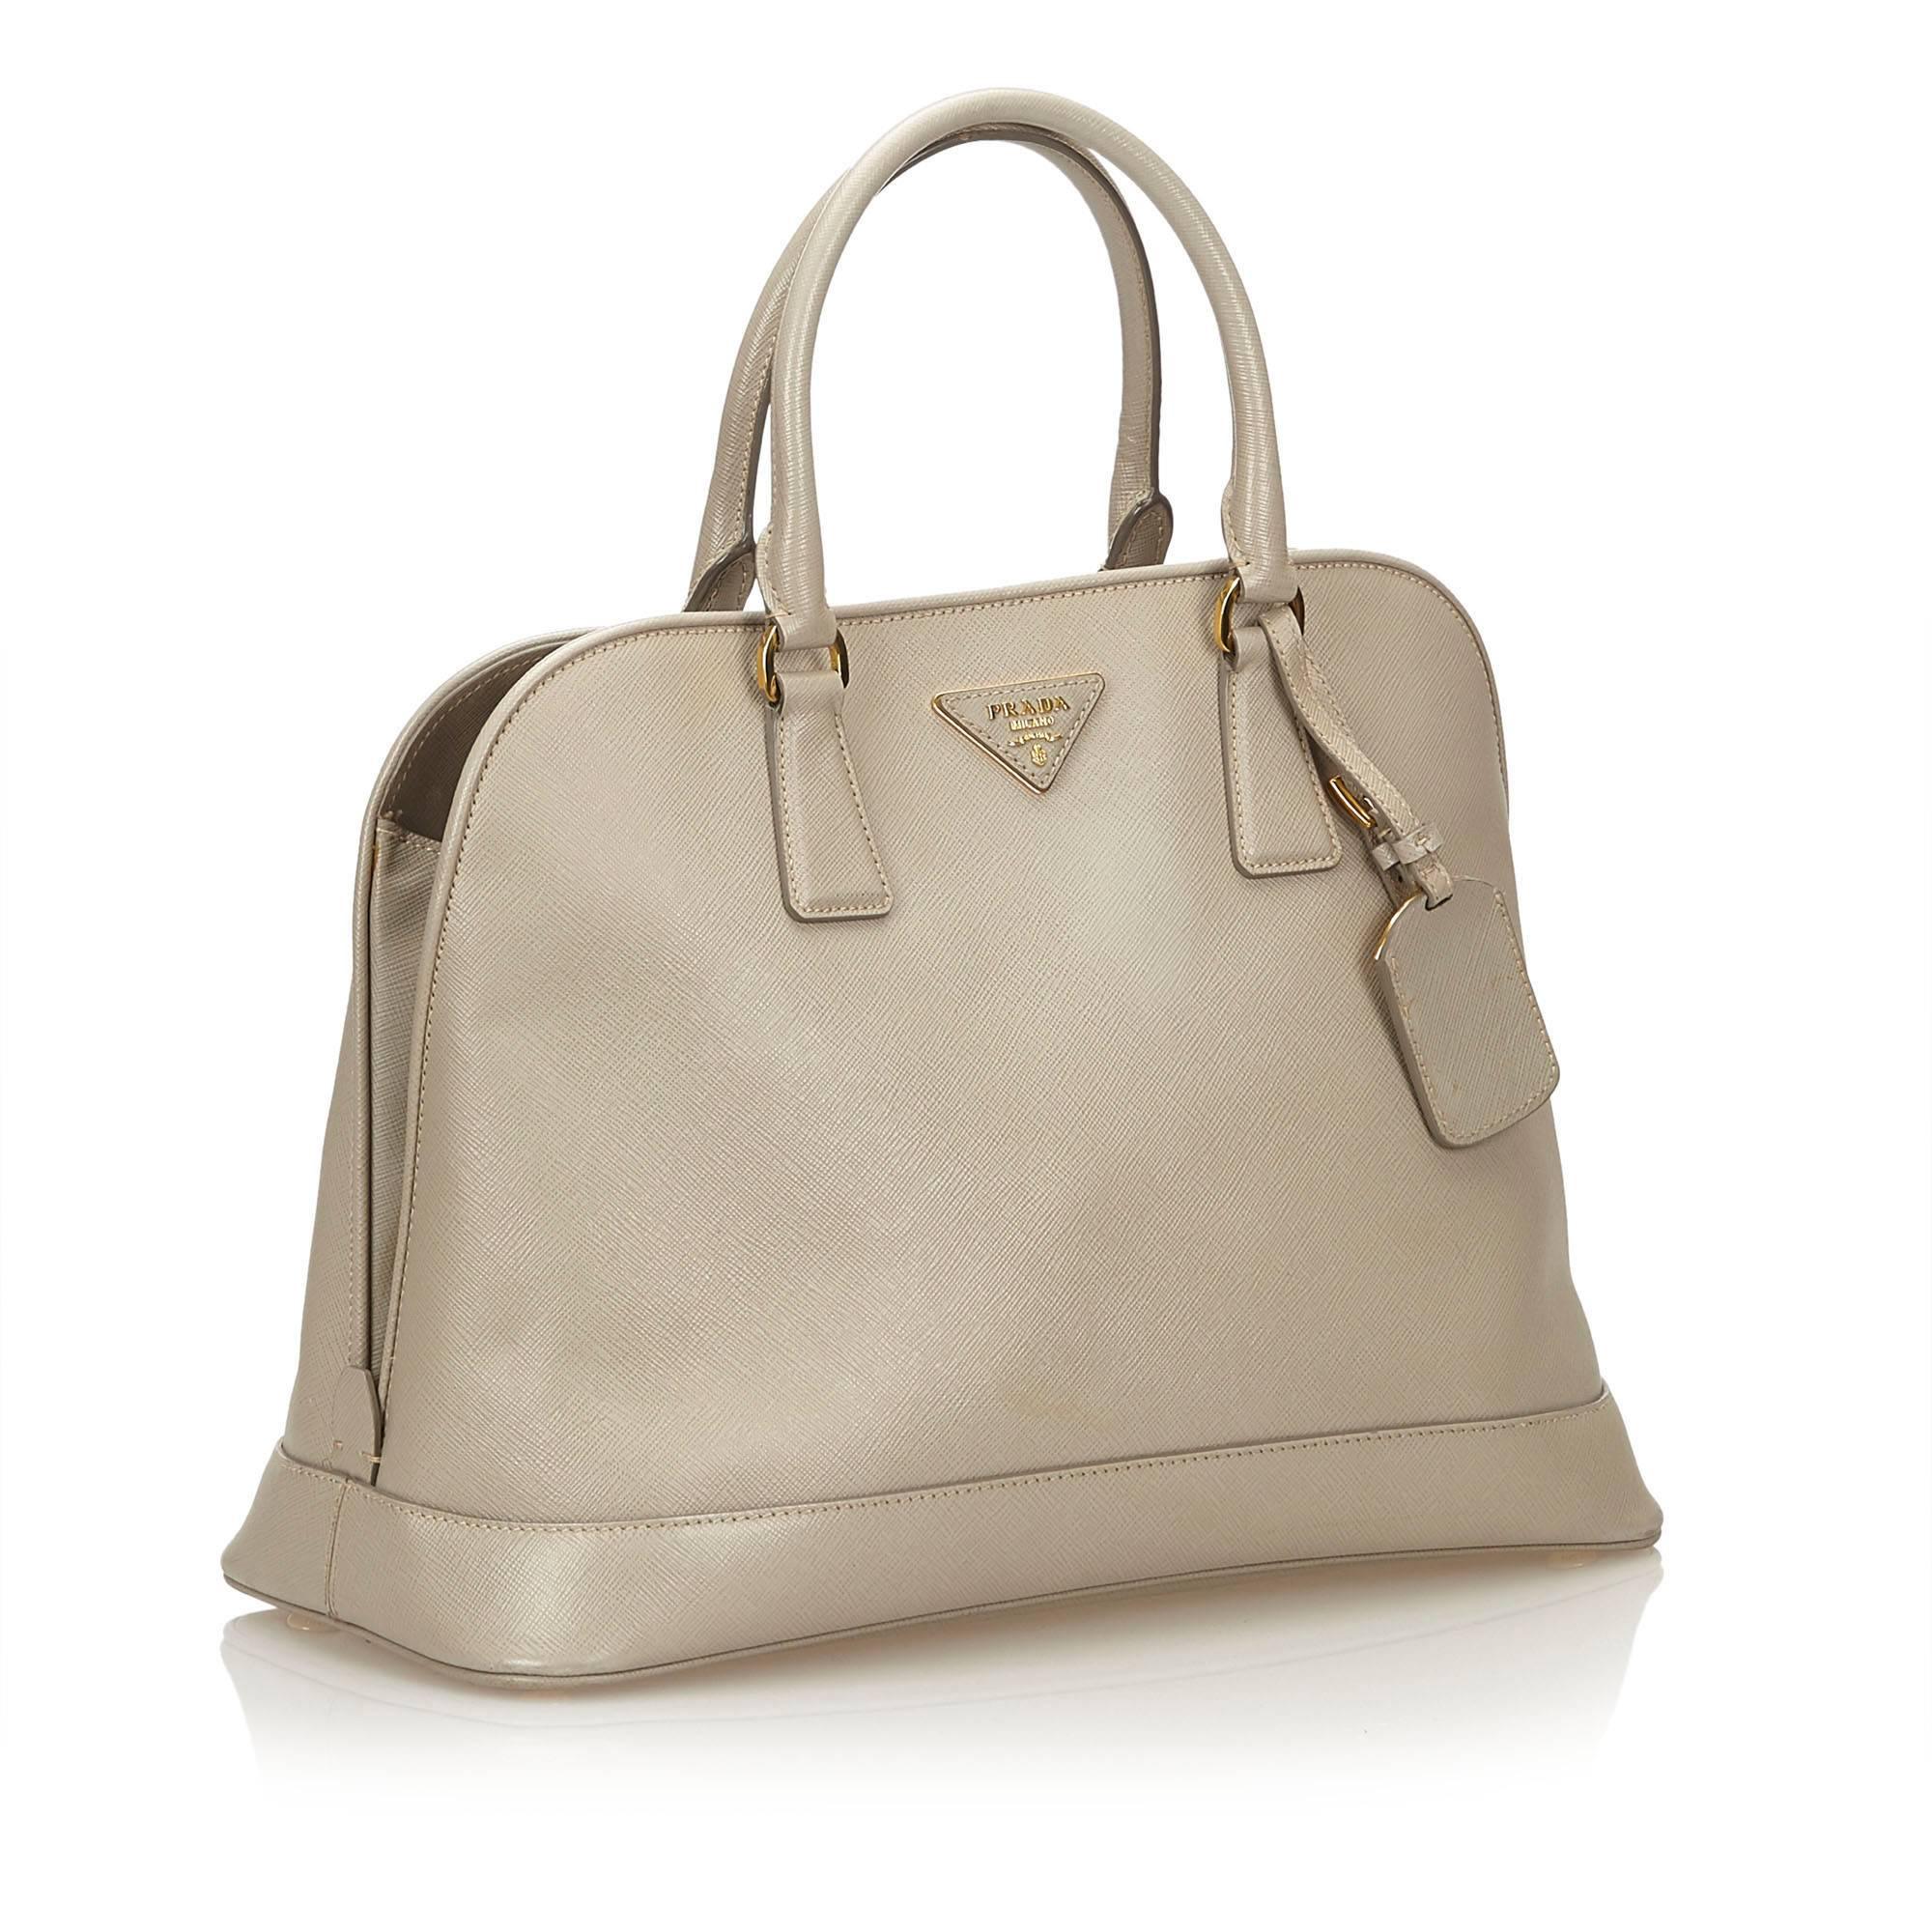 This handbag features a saffiano leather body, rolled leather handles, zip around closure, and interior zip compartment.

It carries a B+ condition rating.

Dimensions: 
Length 26 cm
Width 36 cm
Depth 16 cm
Hand Drop 13 

Inclusions: Name